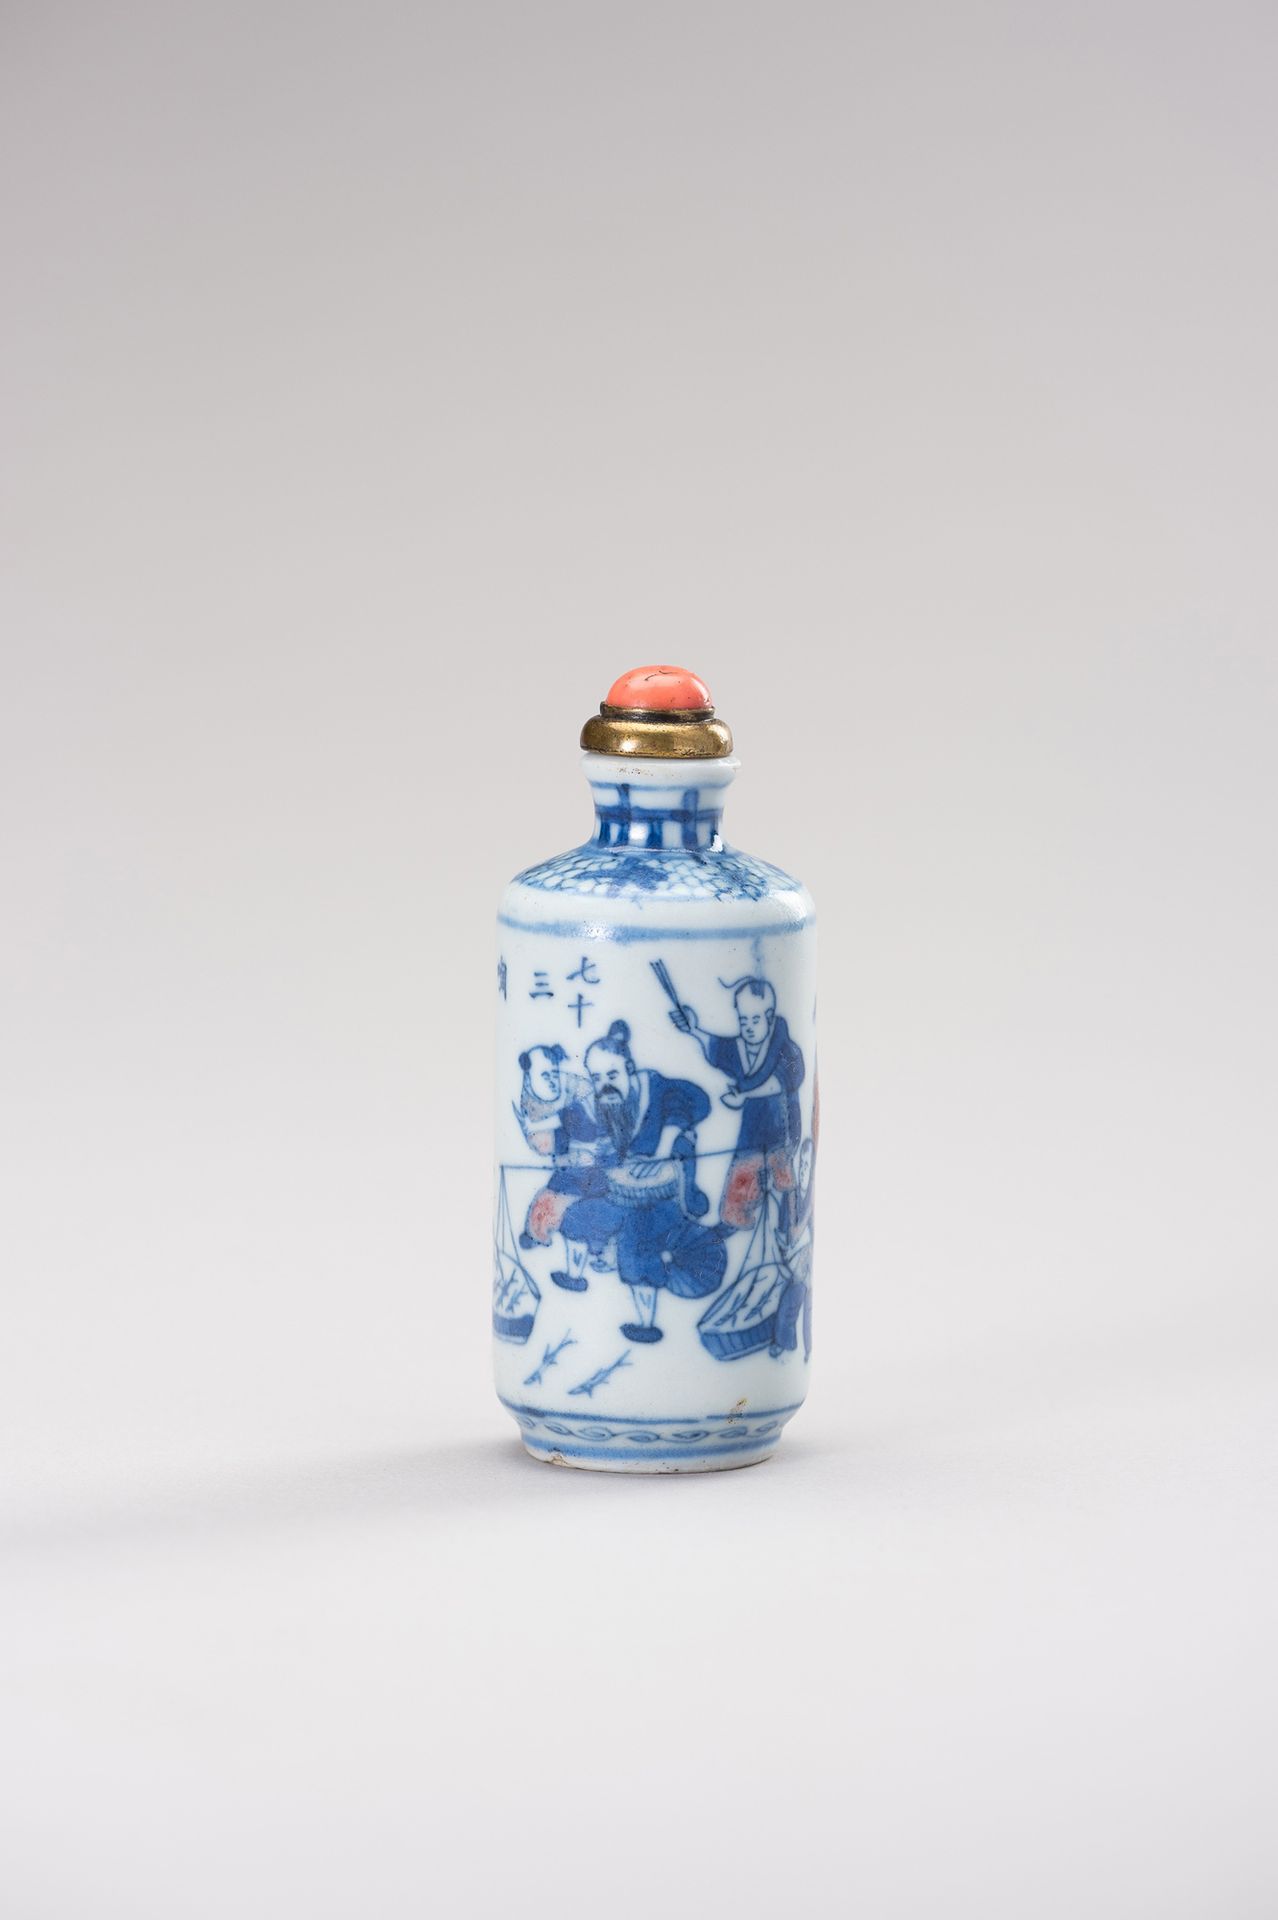 AN IRON-RED, BLUE AND WHITE PORCELAIN SNUFF BOTTLE 一个铁红蓝白瓷水壶
中国，清末（1644-1912）。圆柱&hellip;